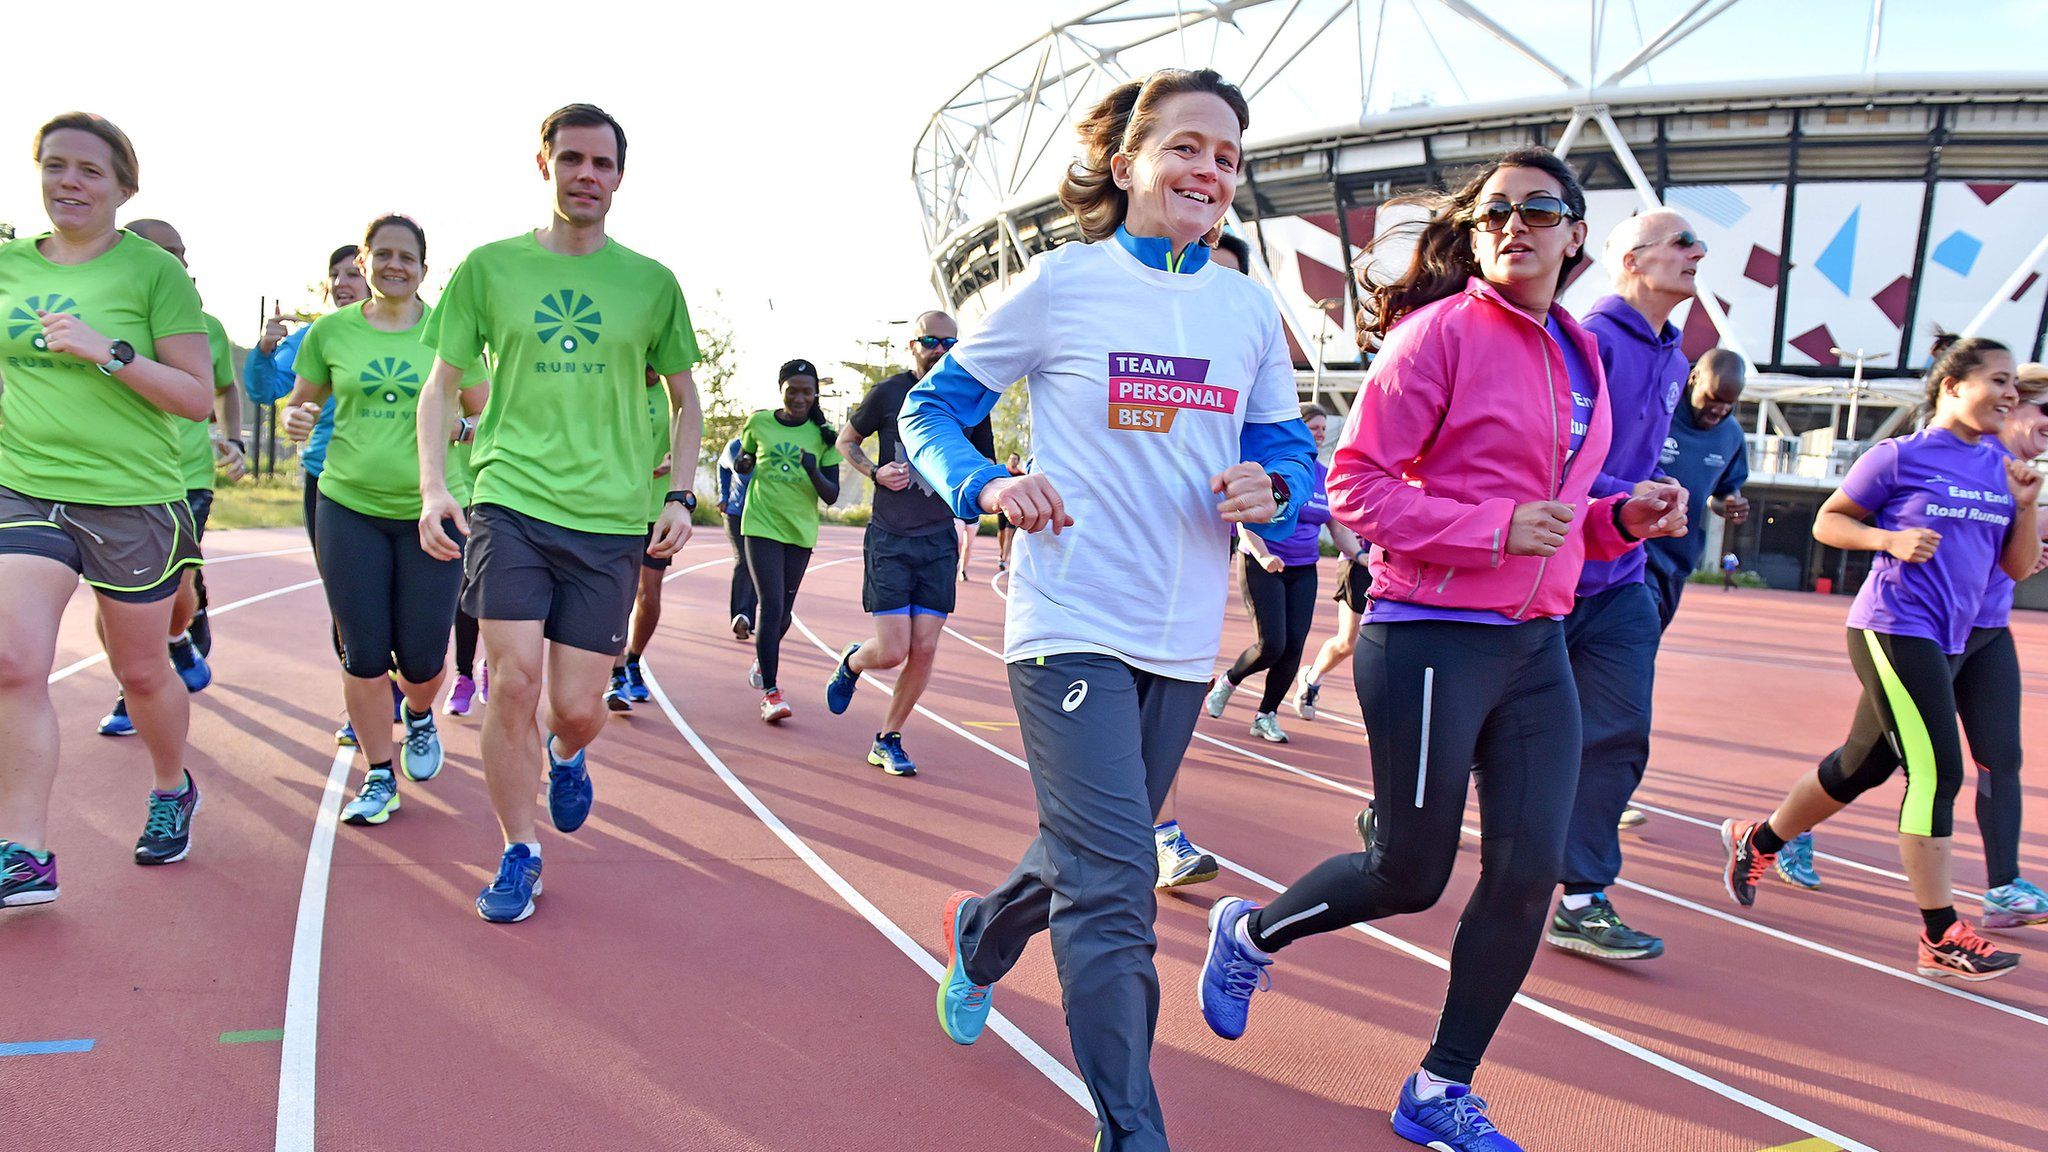 Team Personal Best hosted a community running club takeover at the Queen Elizabeth Olympic Park with Olympian distance runner Mara Yamauchi